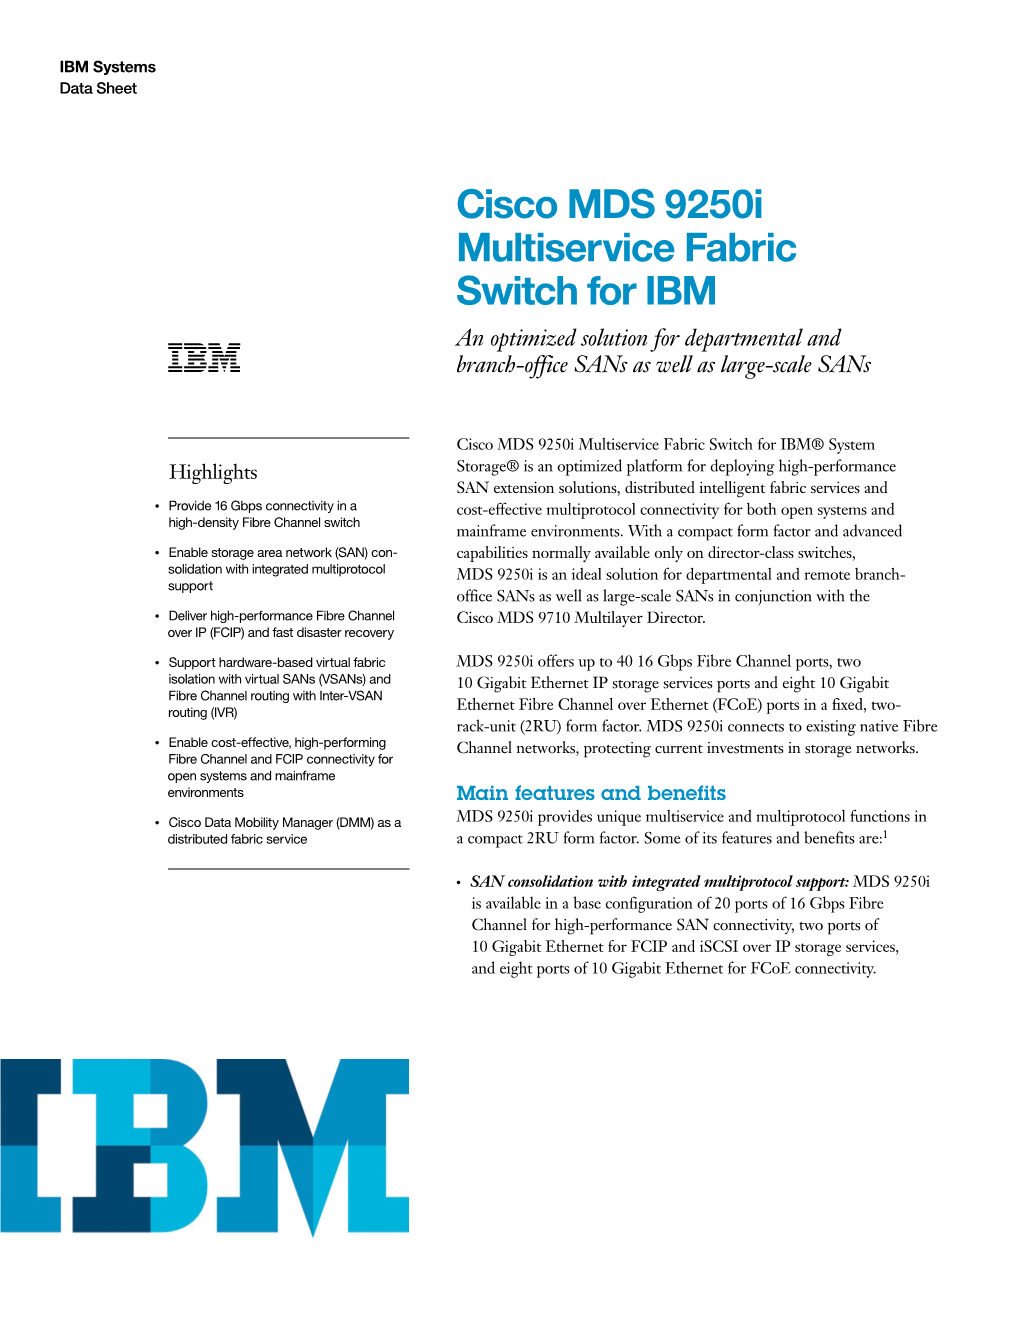 Cisco MDS 9250I Multiservice Fabric Switch for IBM an Optimized Solution for Departmental and Branch-Office Sans As Well As Large-Scale Sans